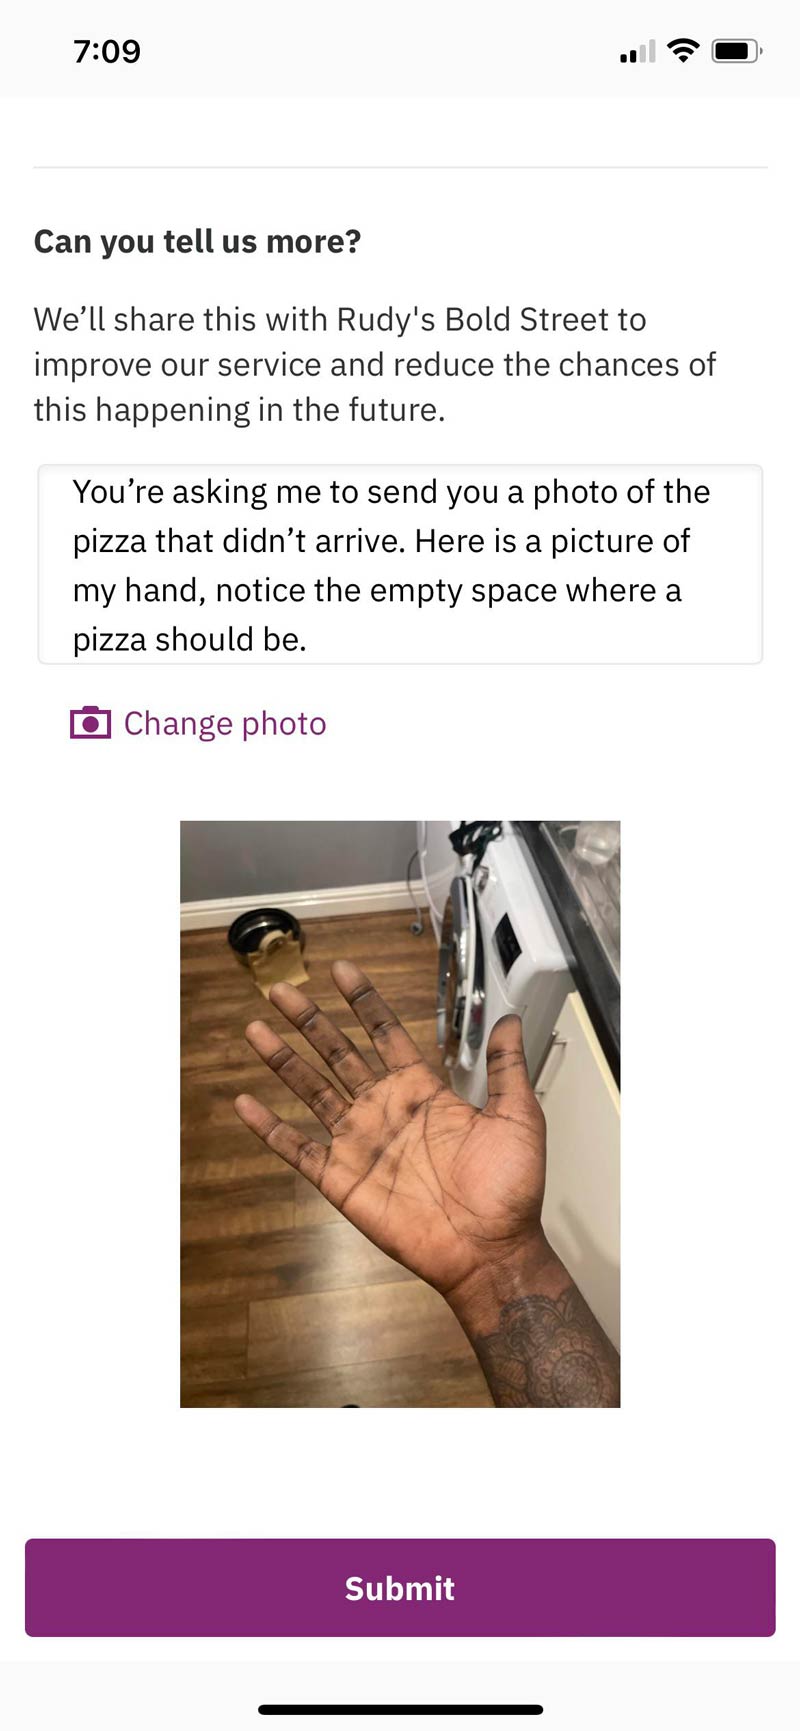 My pizza never arrived and they asked for photographic proof